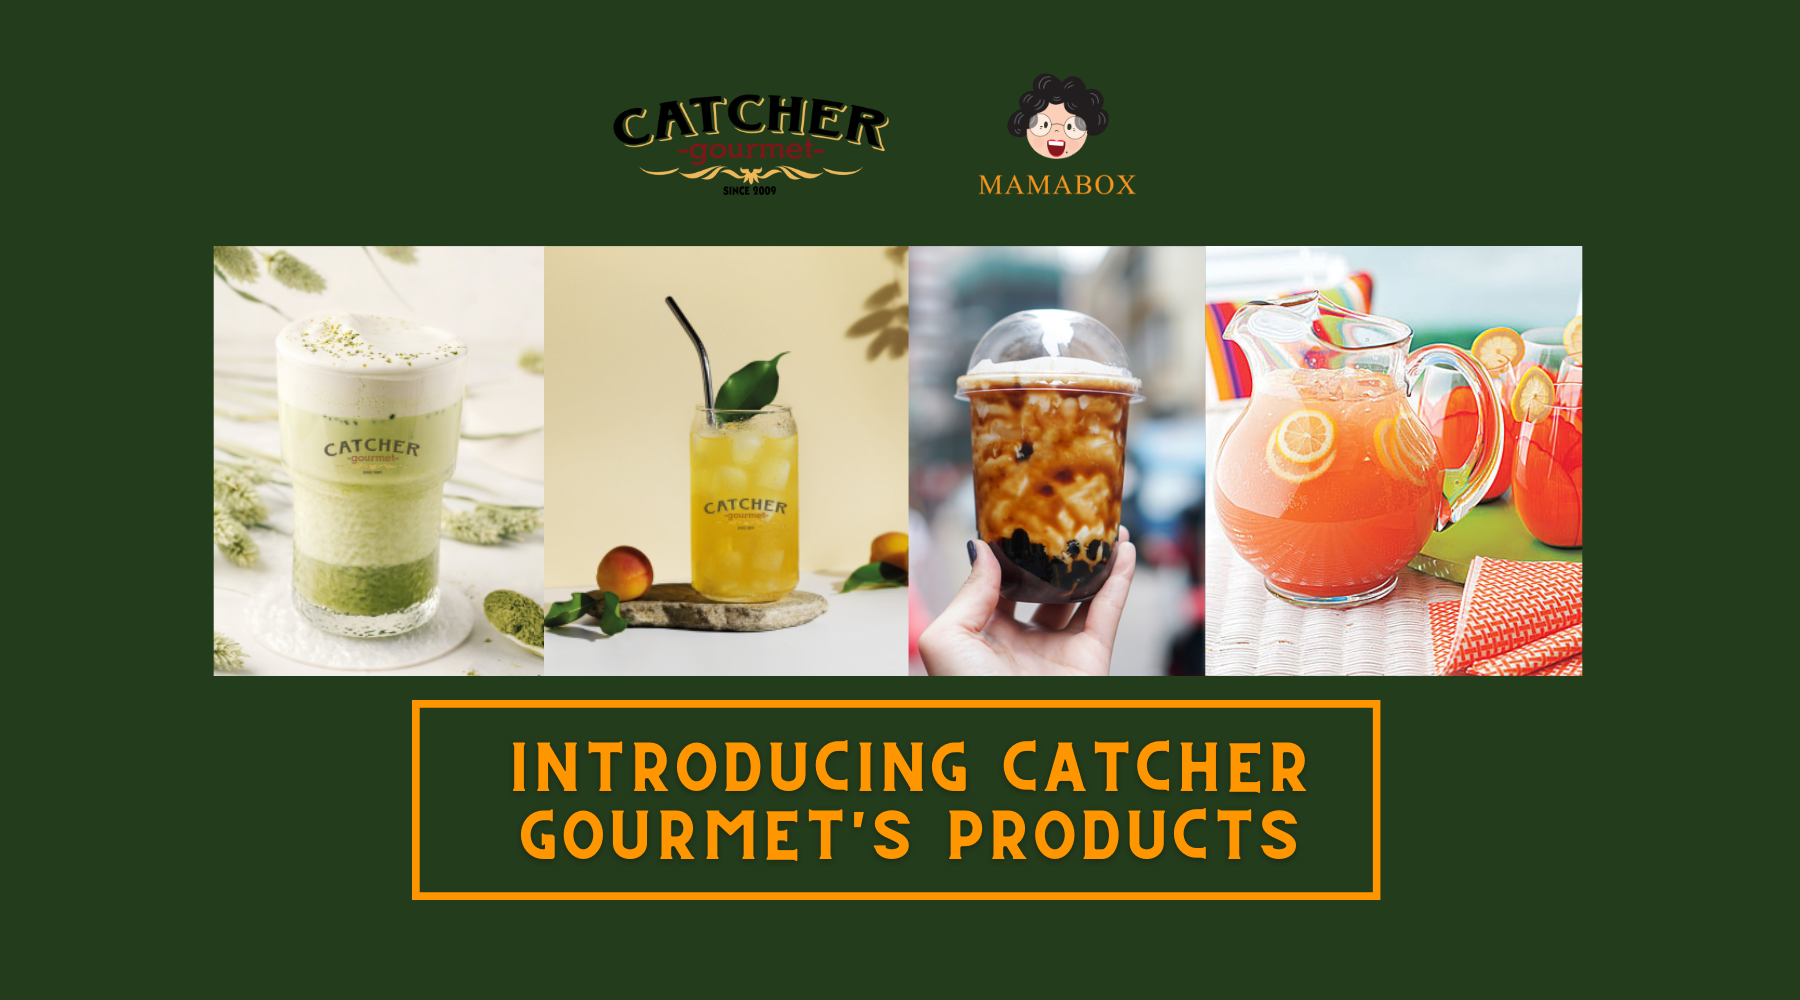 Introducing Catcher Gourmet's Products